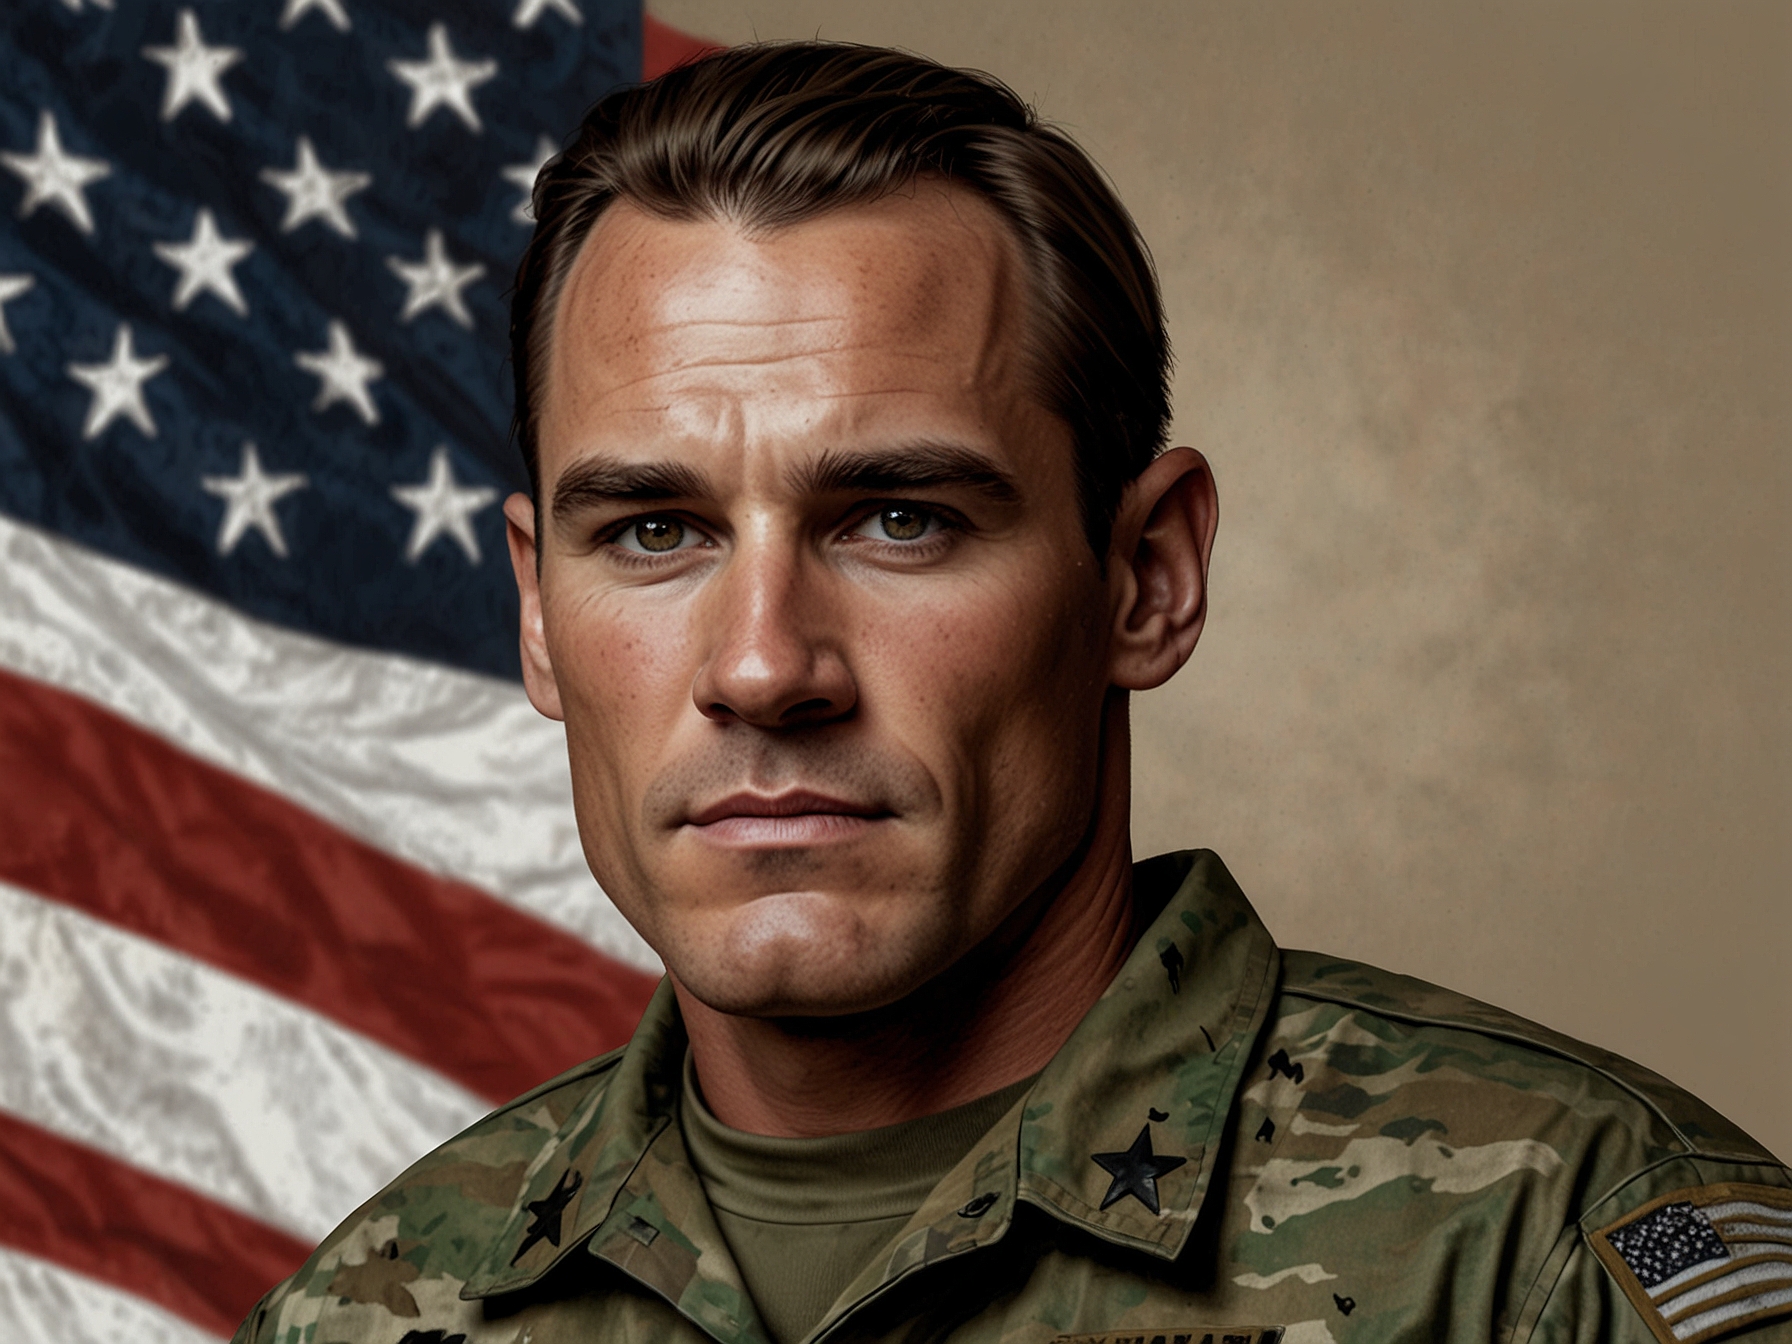 A portrait of Pat Tillman in his Army Ranger uniform, symbolizing sacrifice and patriotism. Tillman's legacy as a former NFL player turned war hero brings emotional weight to the award controversy.